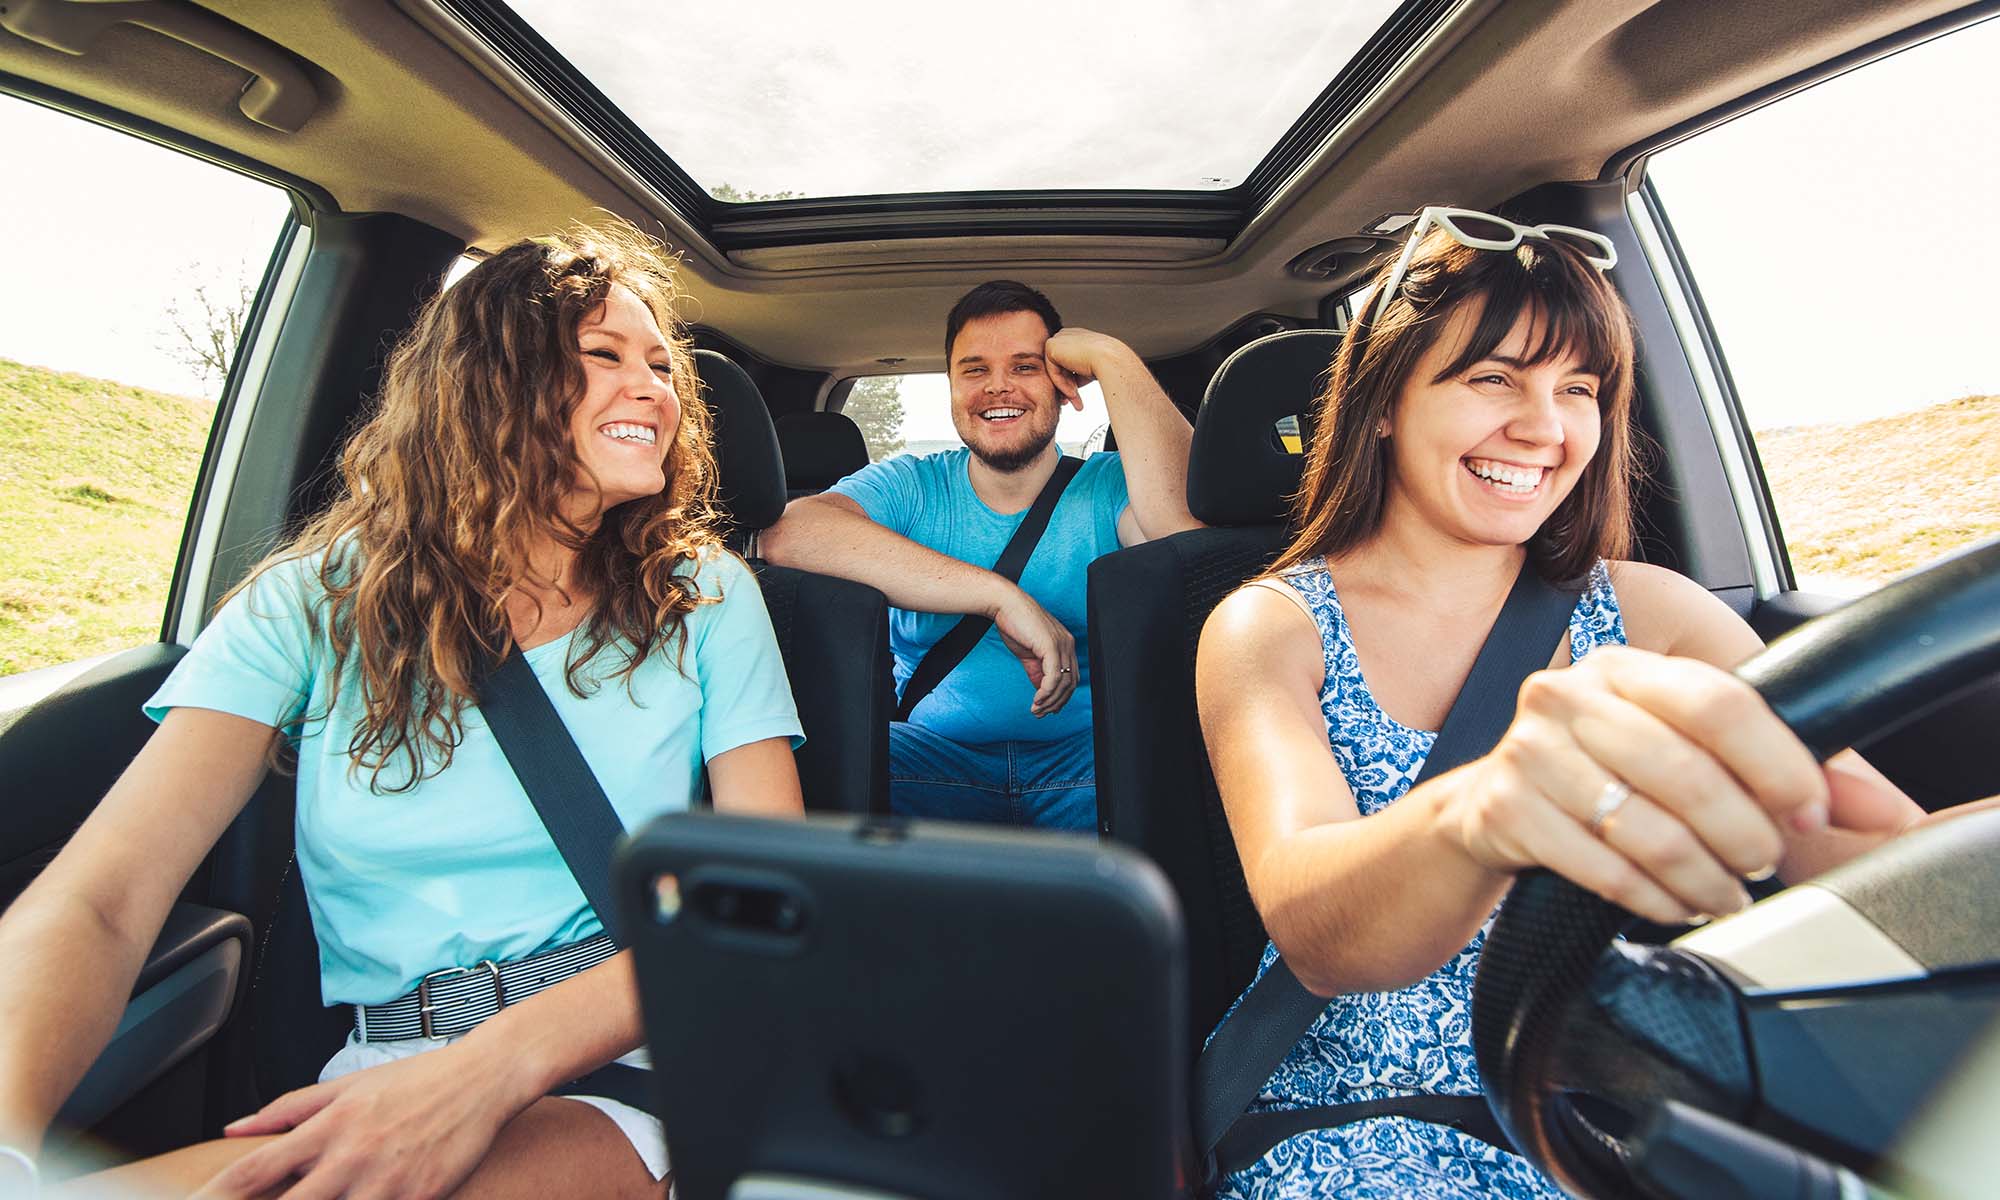 A group of friends on a road trip use their smartphone, and apps like the Endurance Mobile app, to help them have a safe and fun trip.